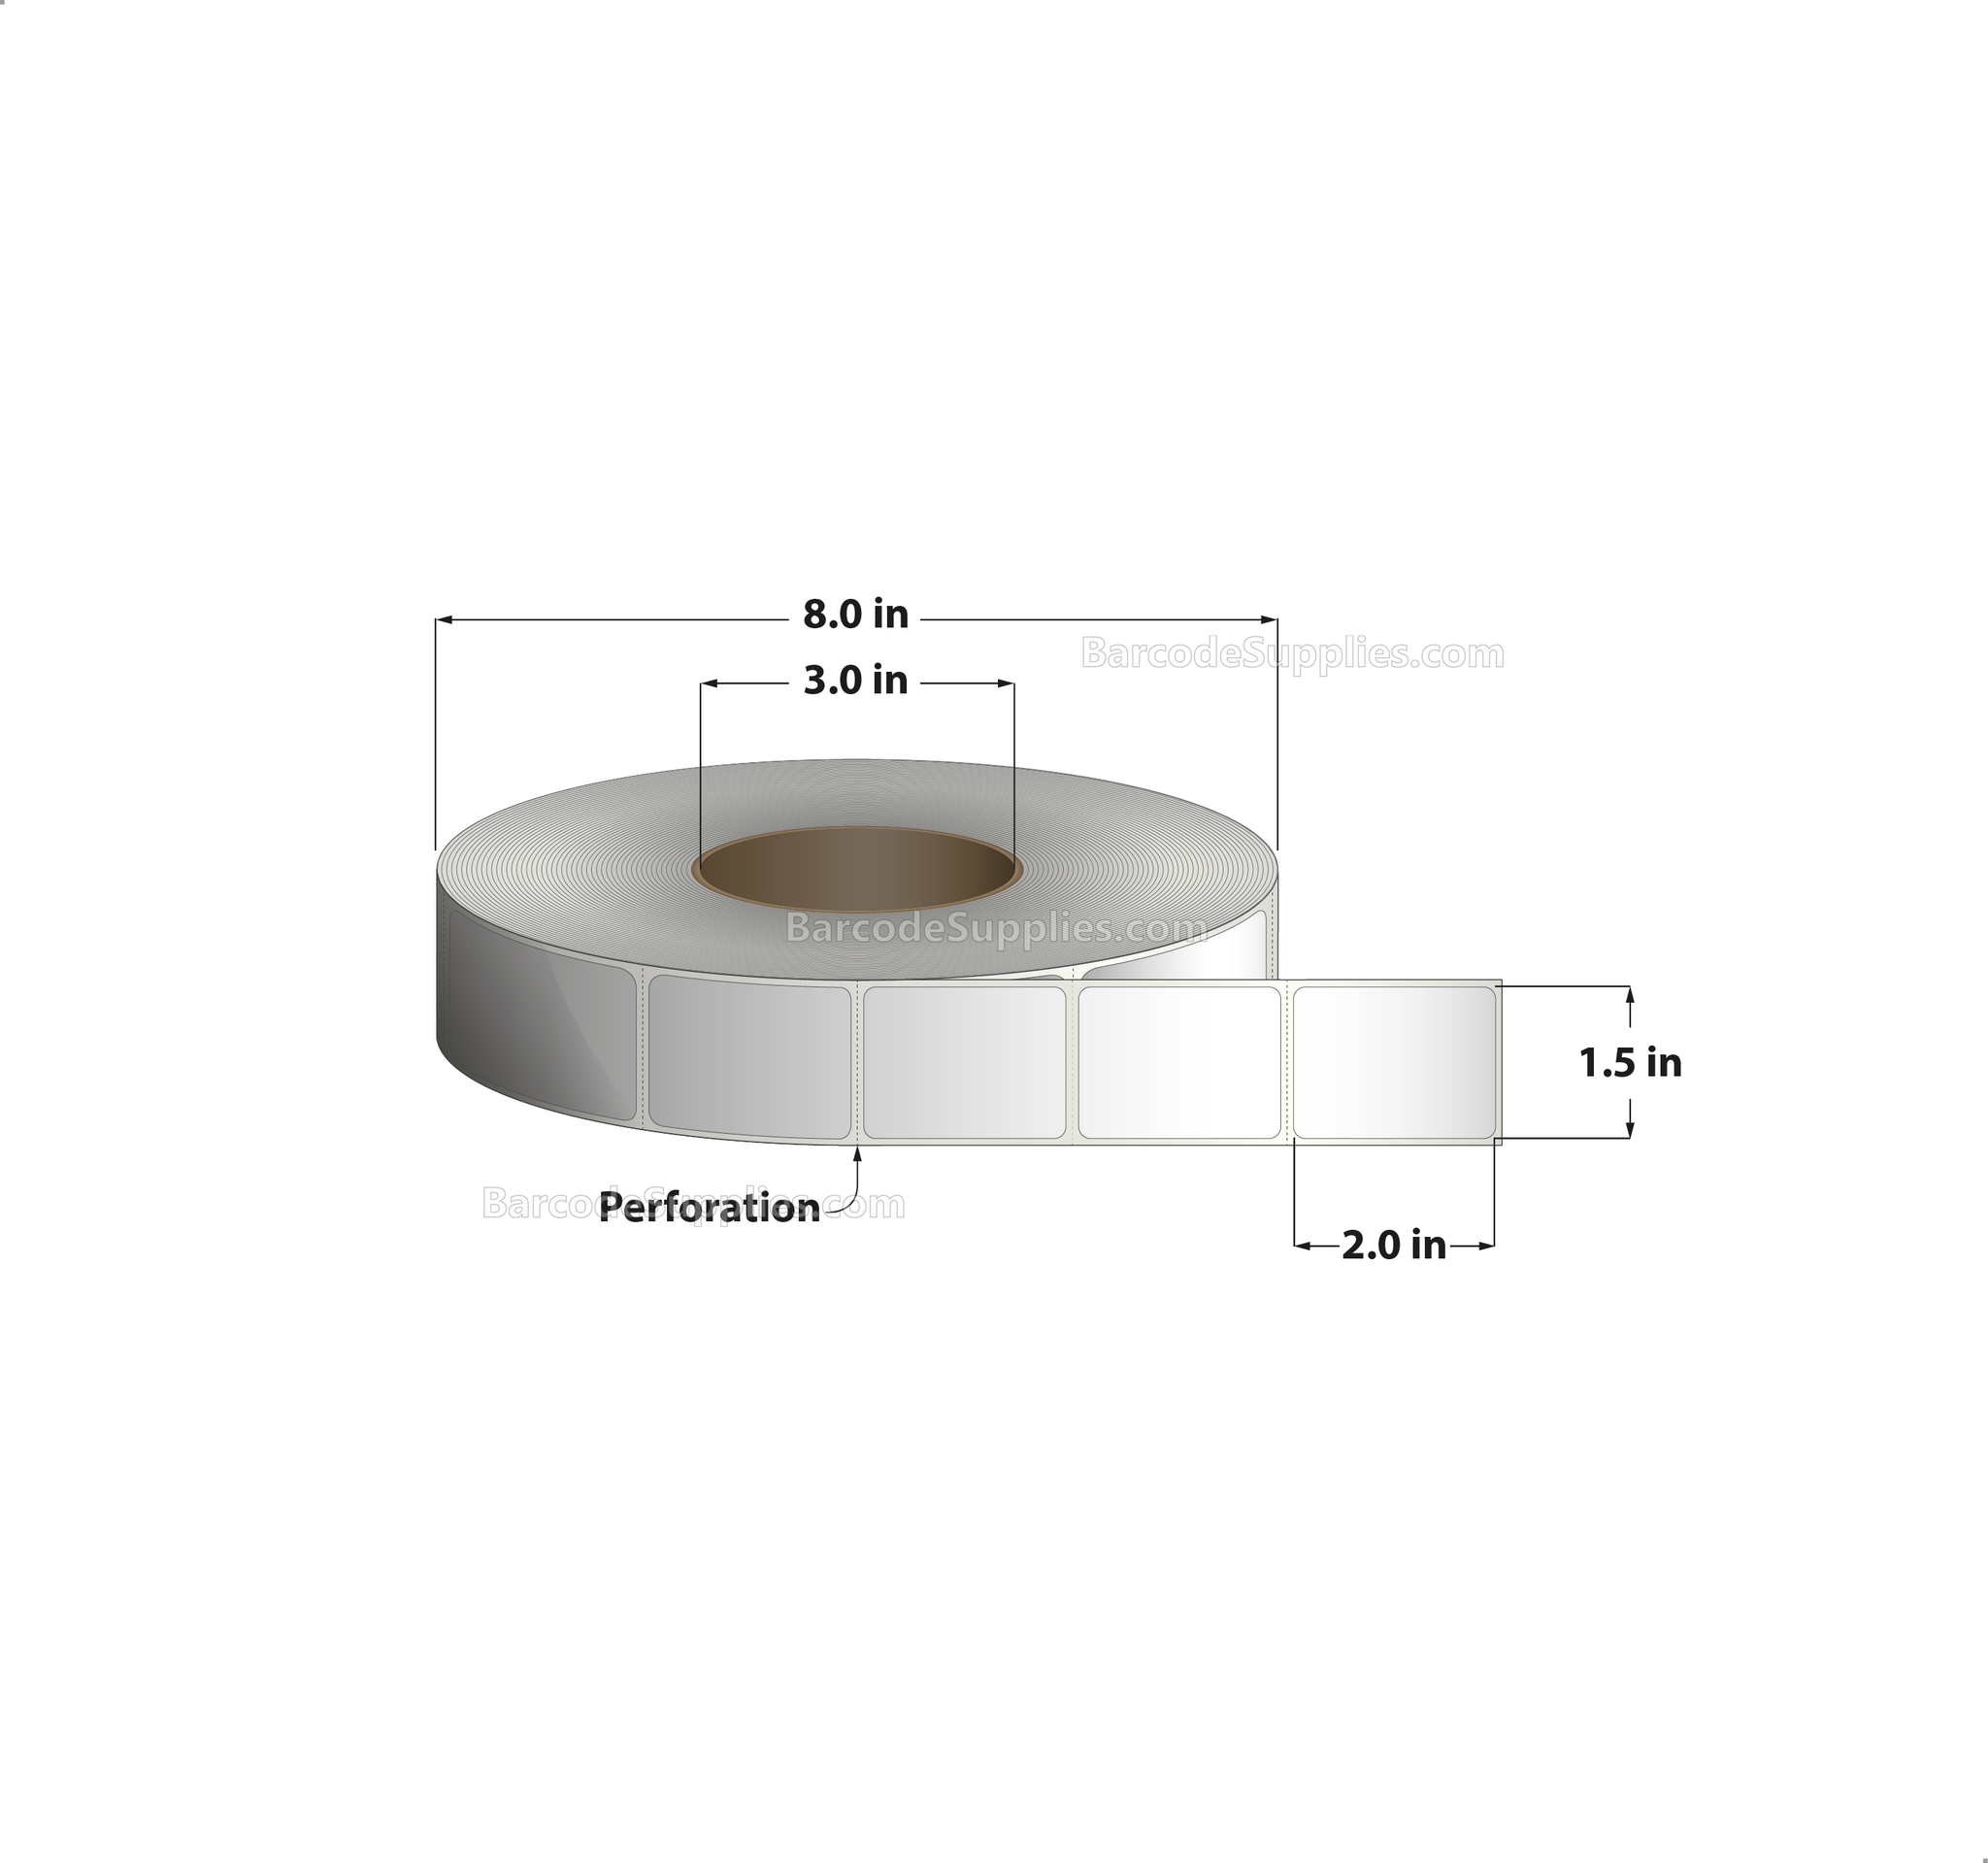 1.5 x 2 Thermal Transfer White Labels With Permanent Adhesive - Perforated - 2900 Labels Per Roll - Carton Of 8 Rolls - 23200 Labels Total - MPN: RT-15-2-2900-3